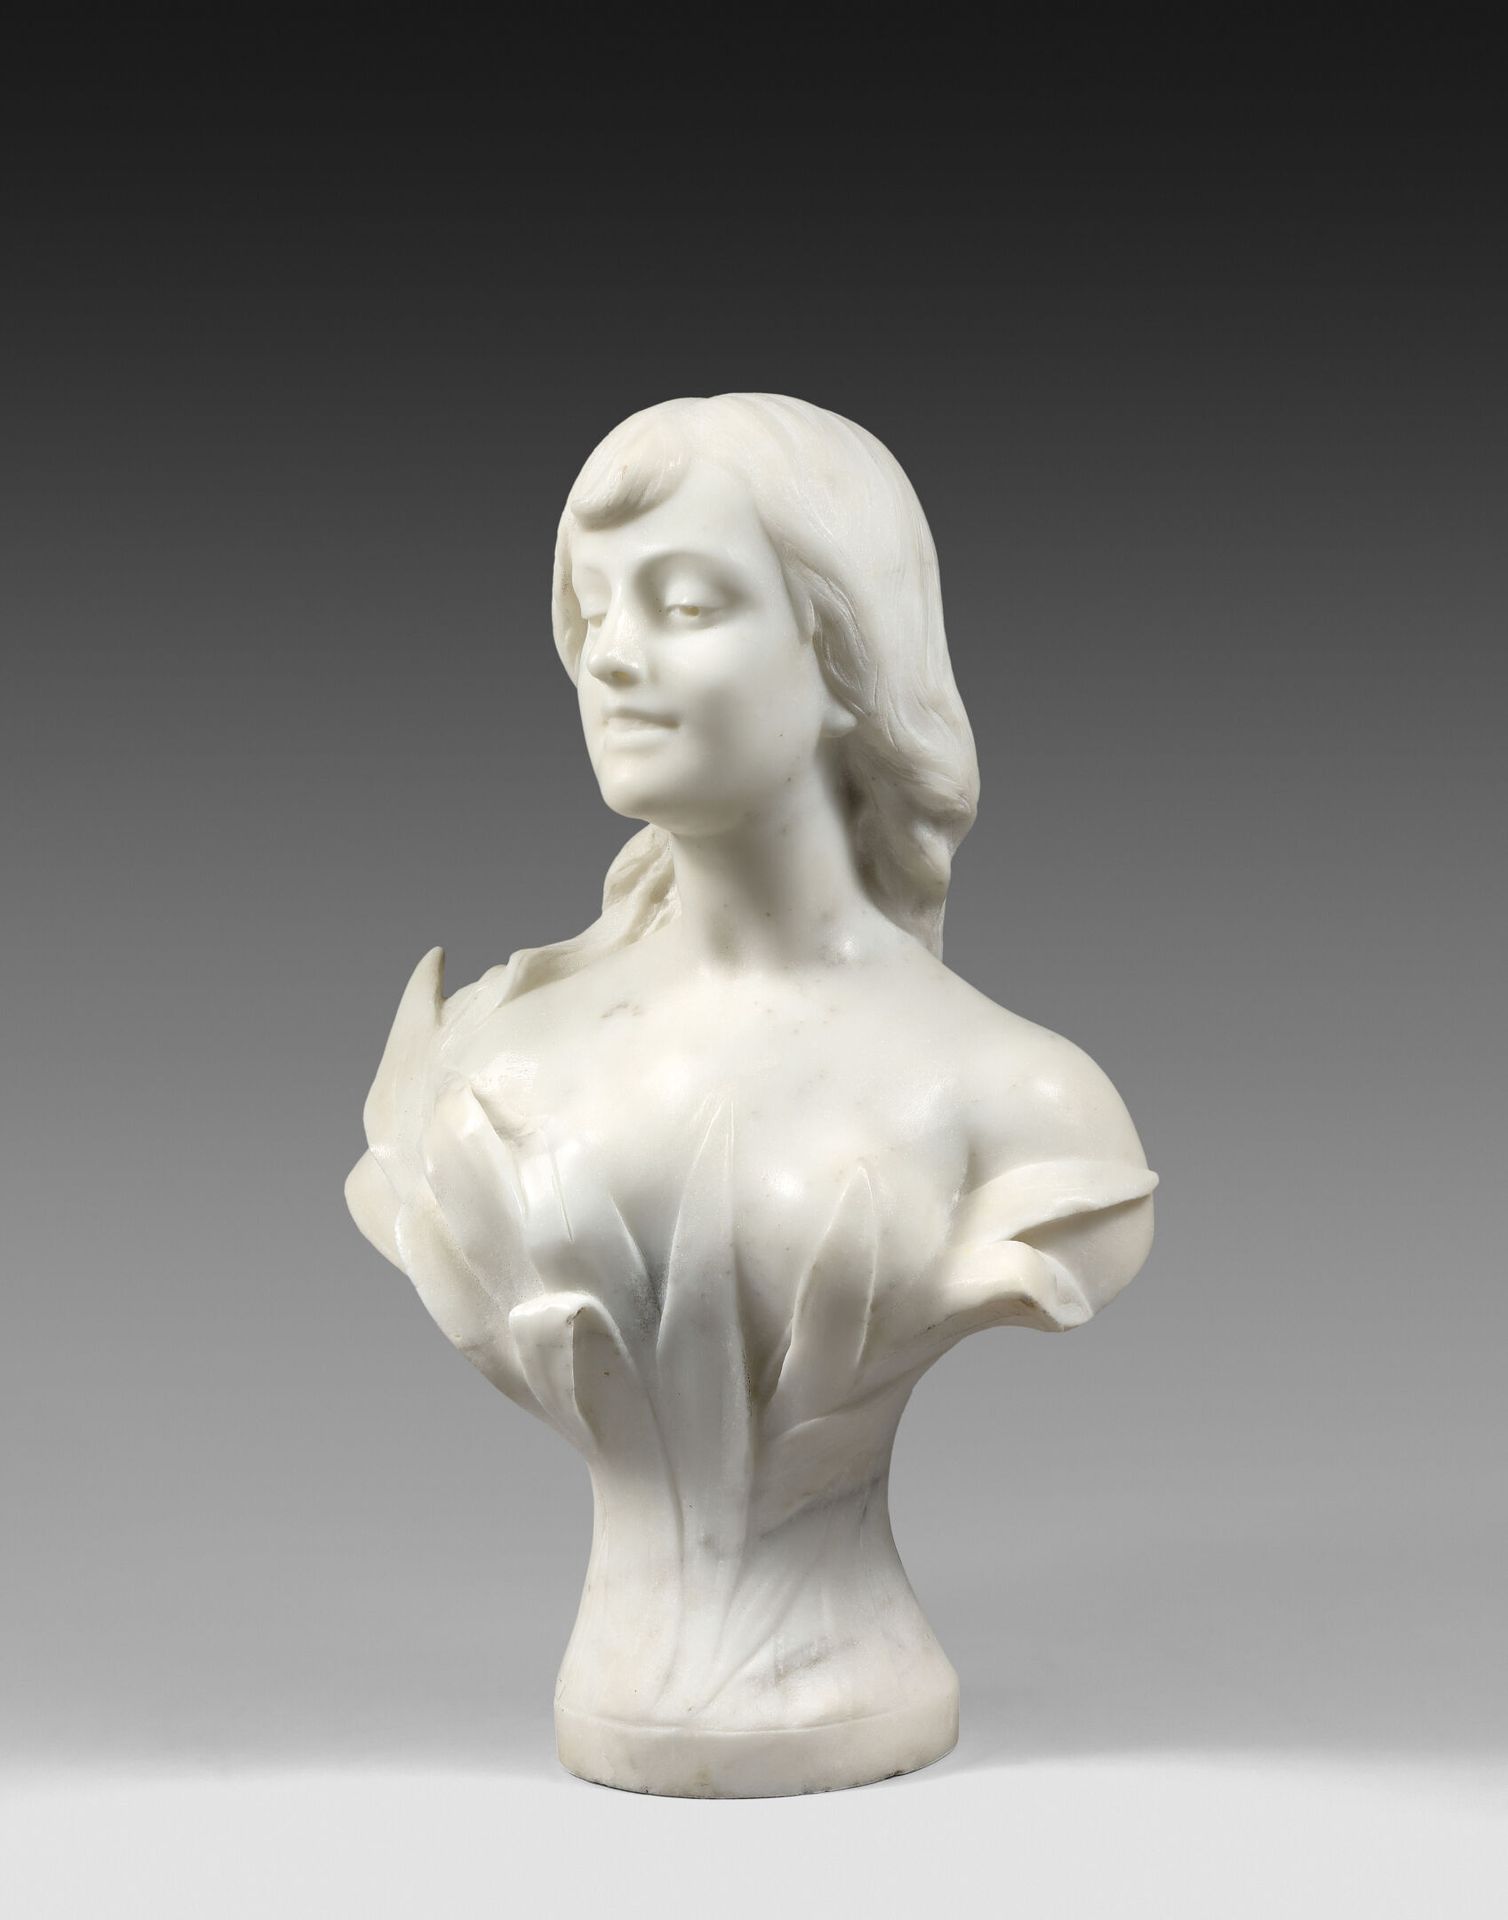 Null Elie RASET (1873-1956) : " bust of a woman with a neckline".
Polished marbl&hellip;